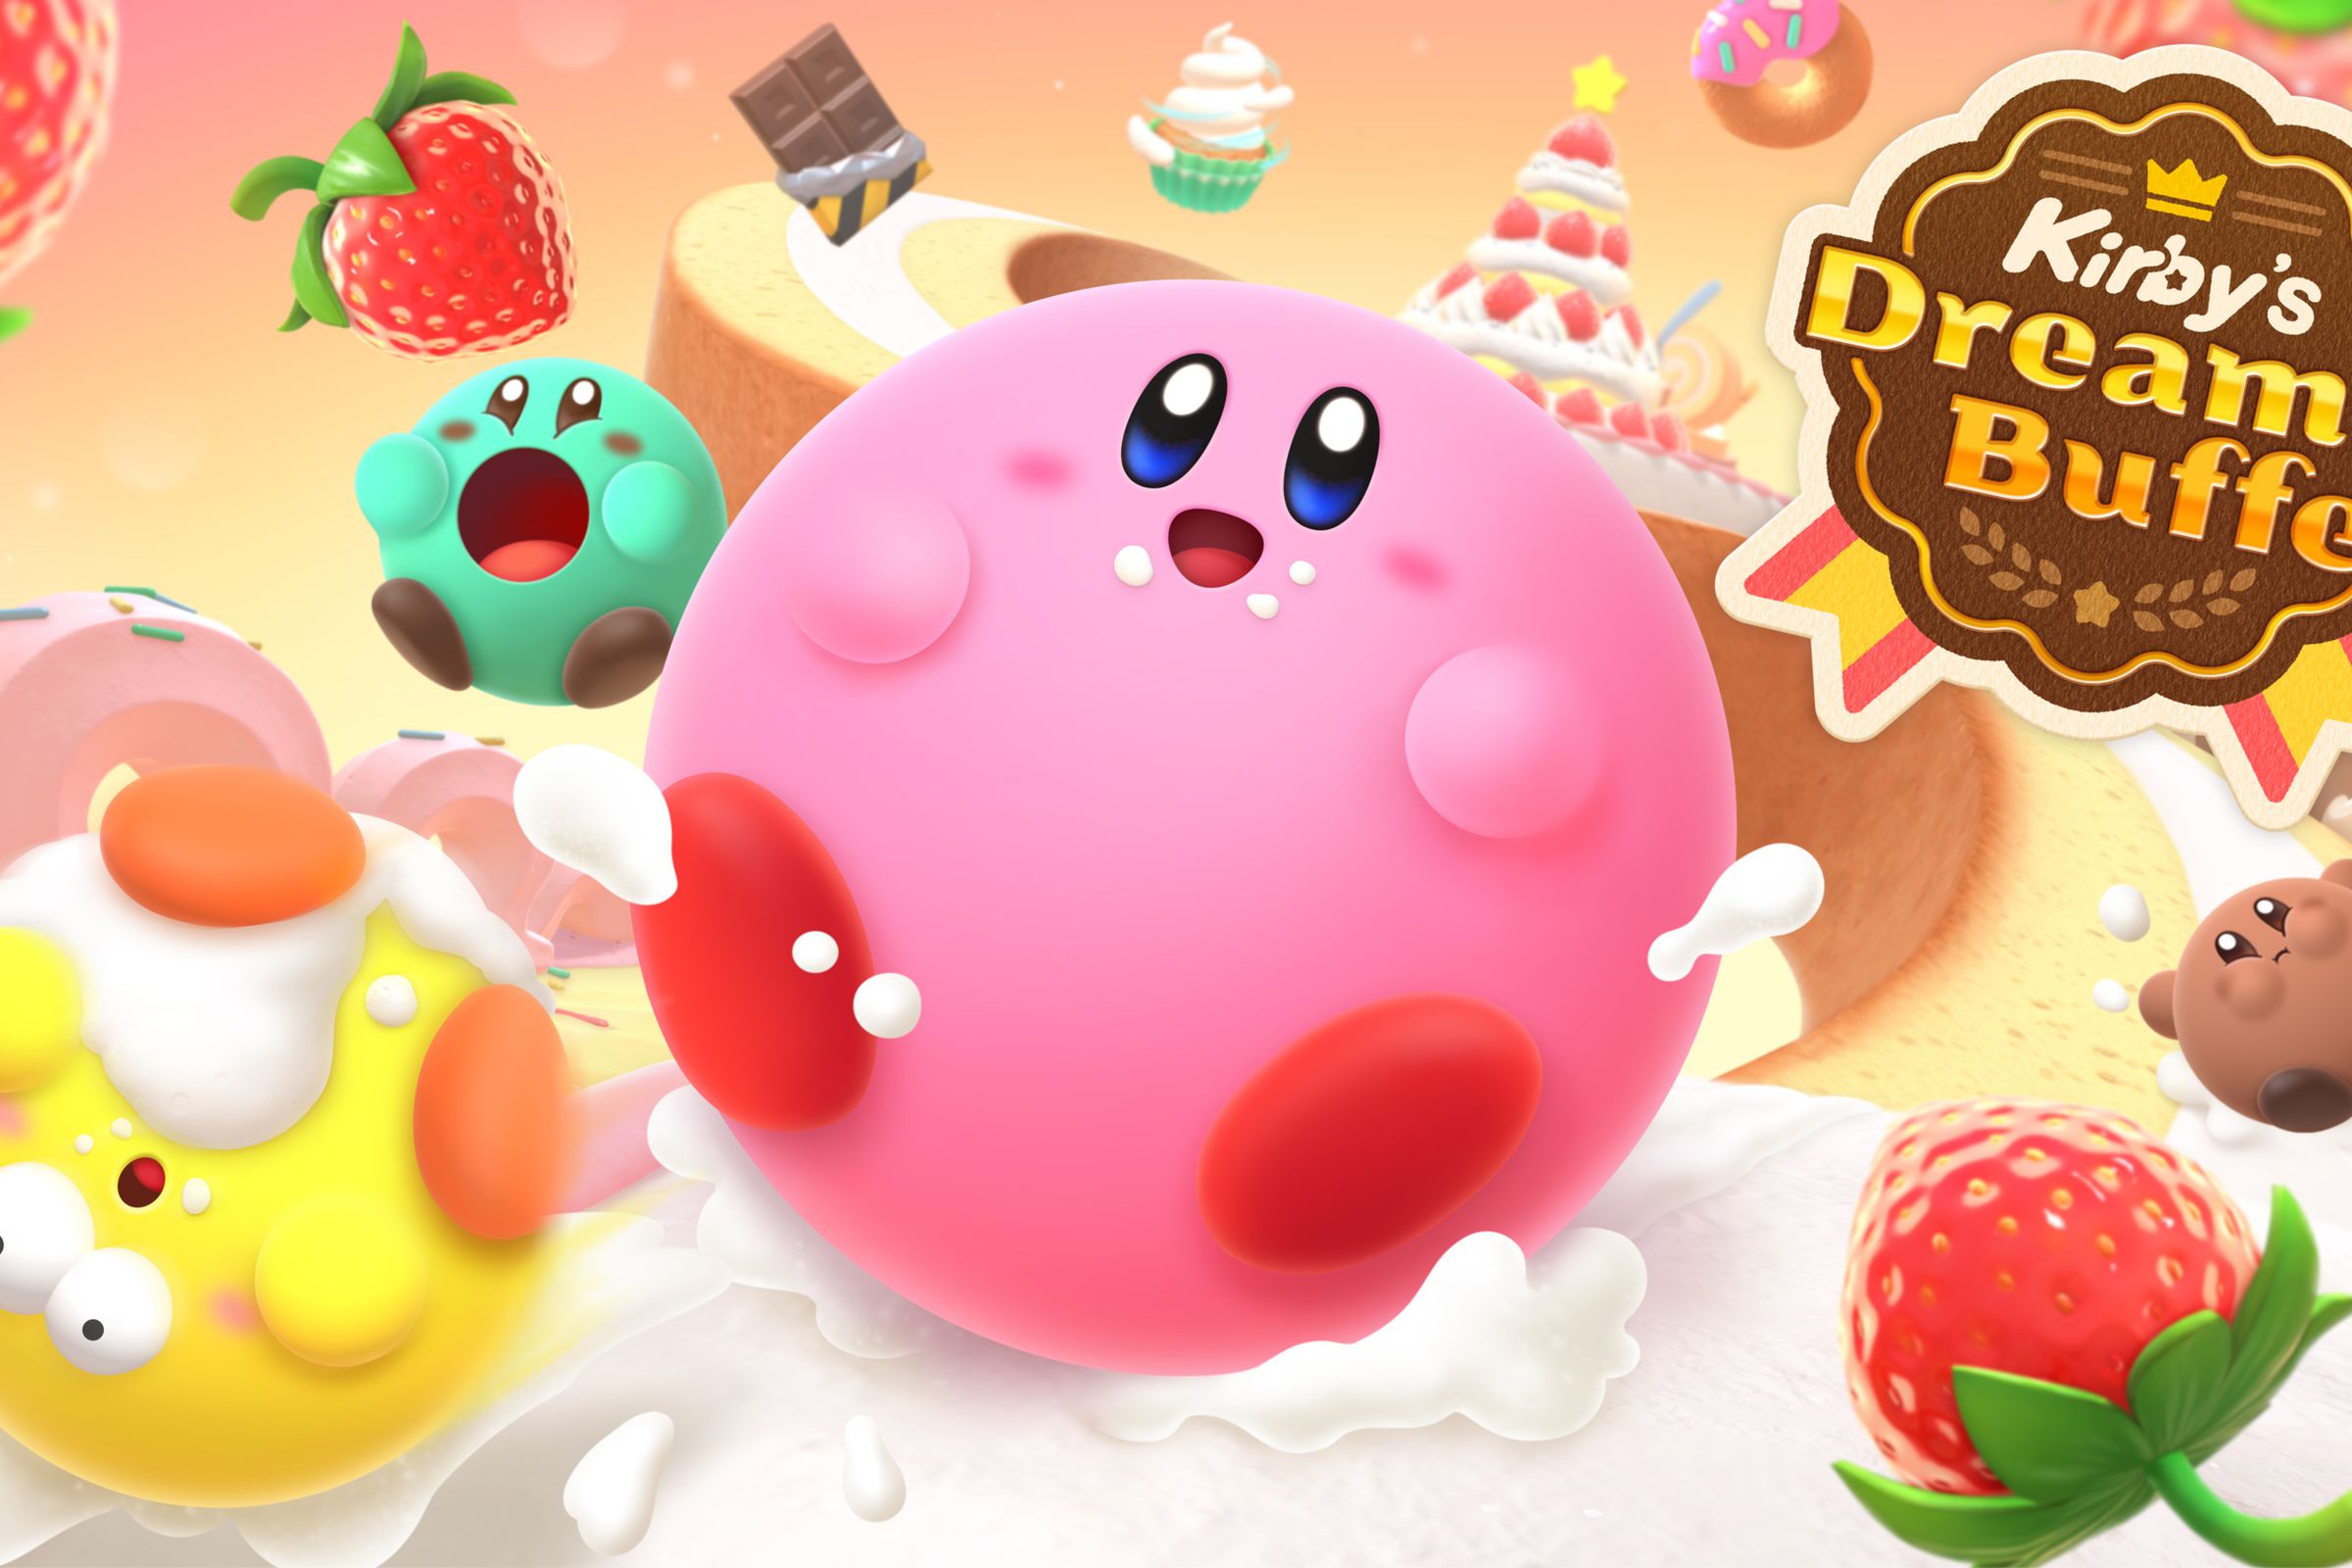 Box art from Nintendo Switch game Kirby’s Dream Buffet featuring four rotund Kirbys of different colors cavorting on a game course made of different kinds of sweets.